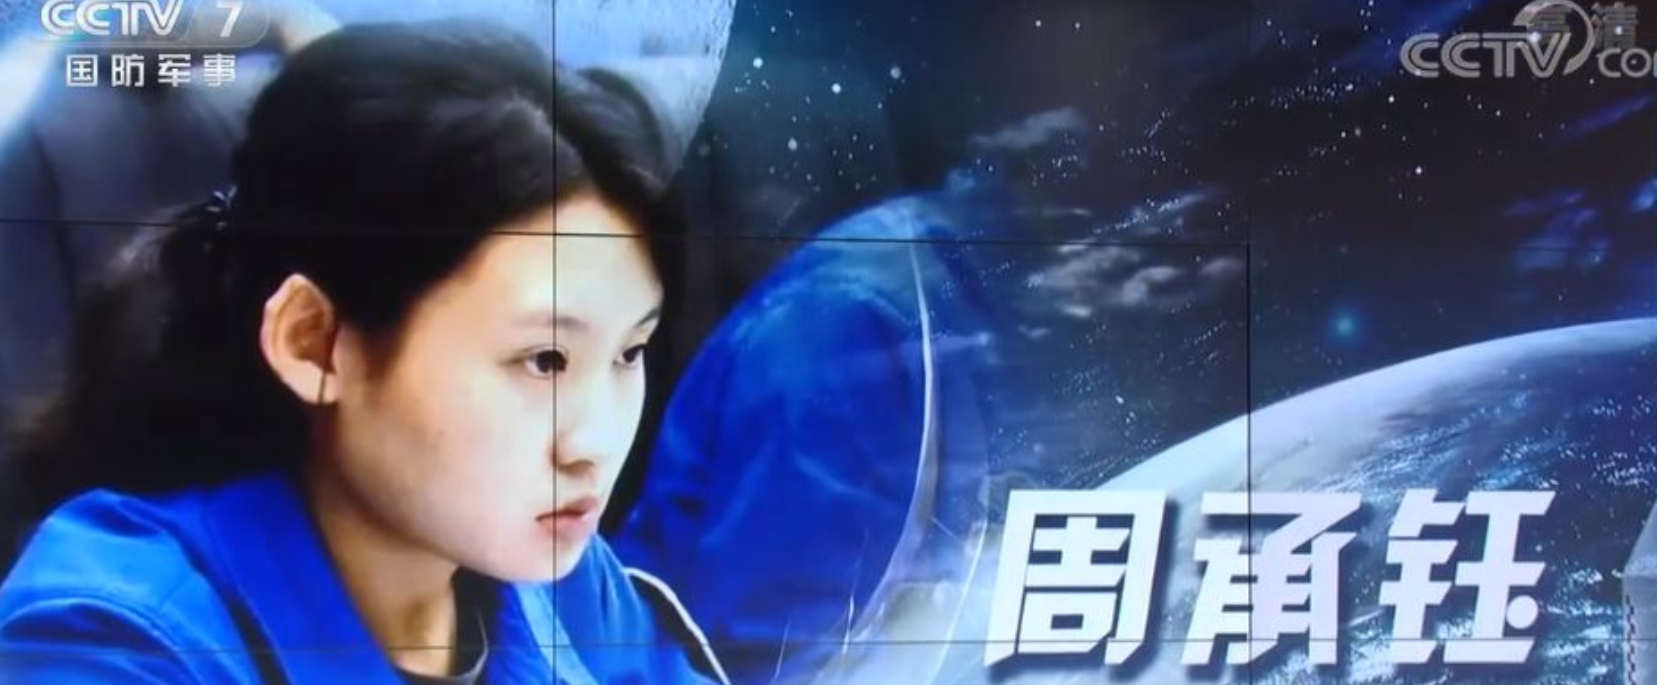 Zhou Chengyu, a 24-year-old female space commander1